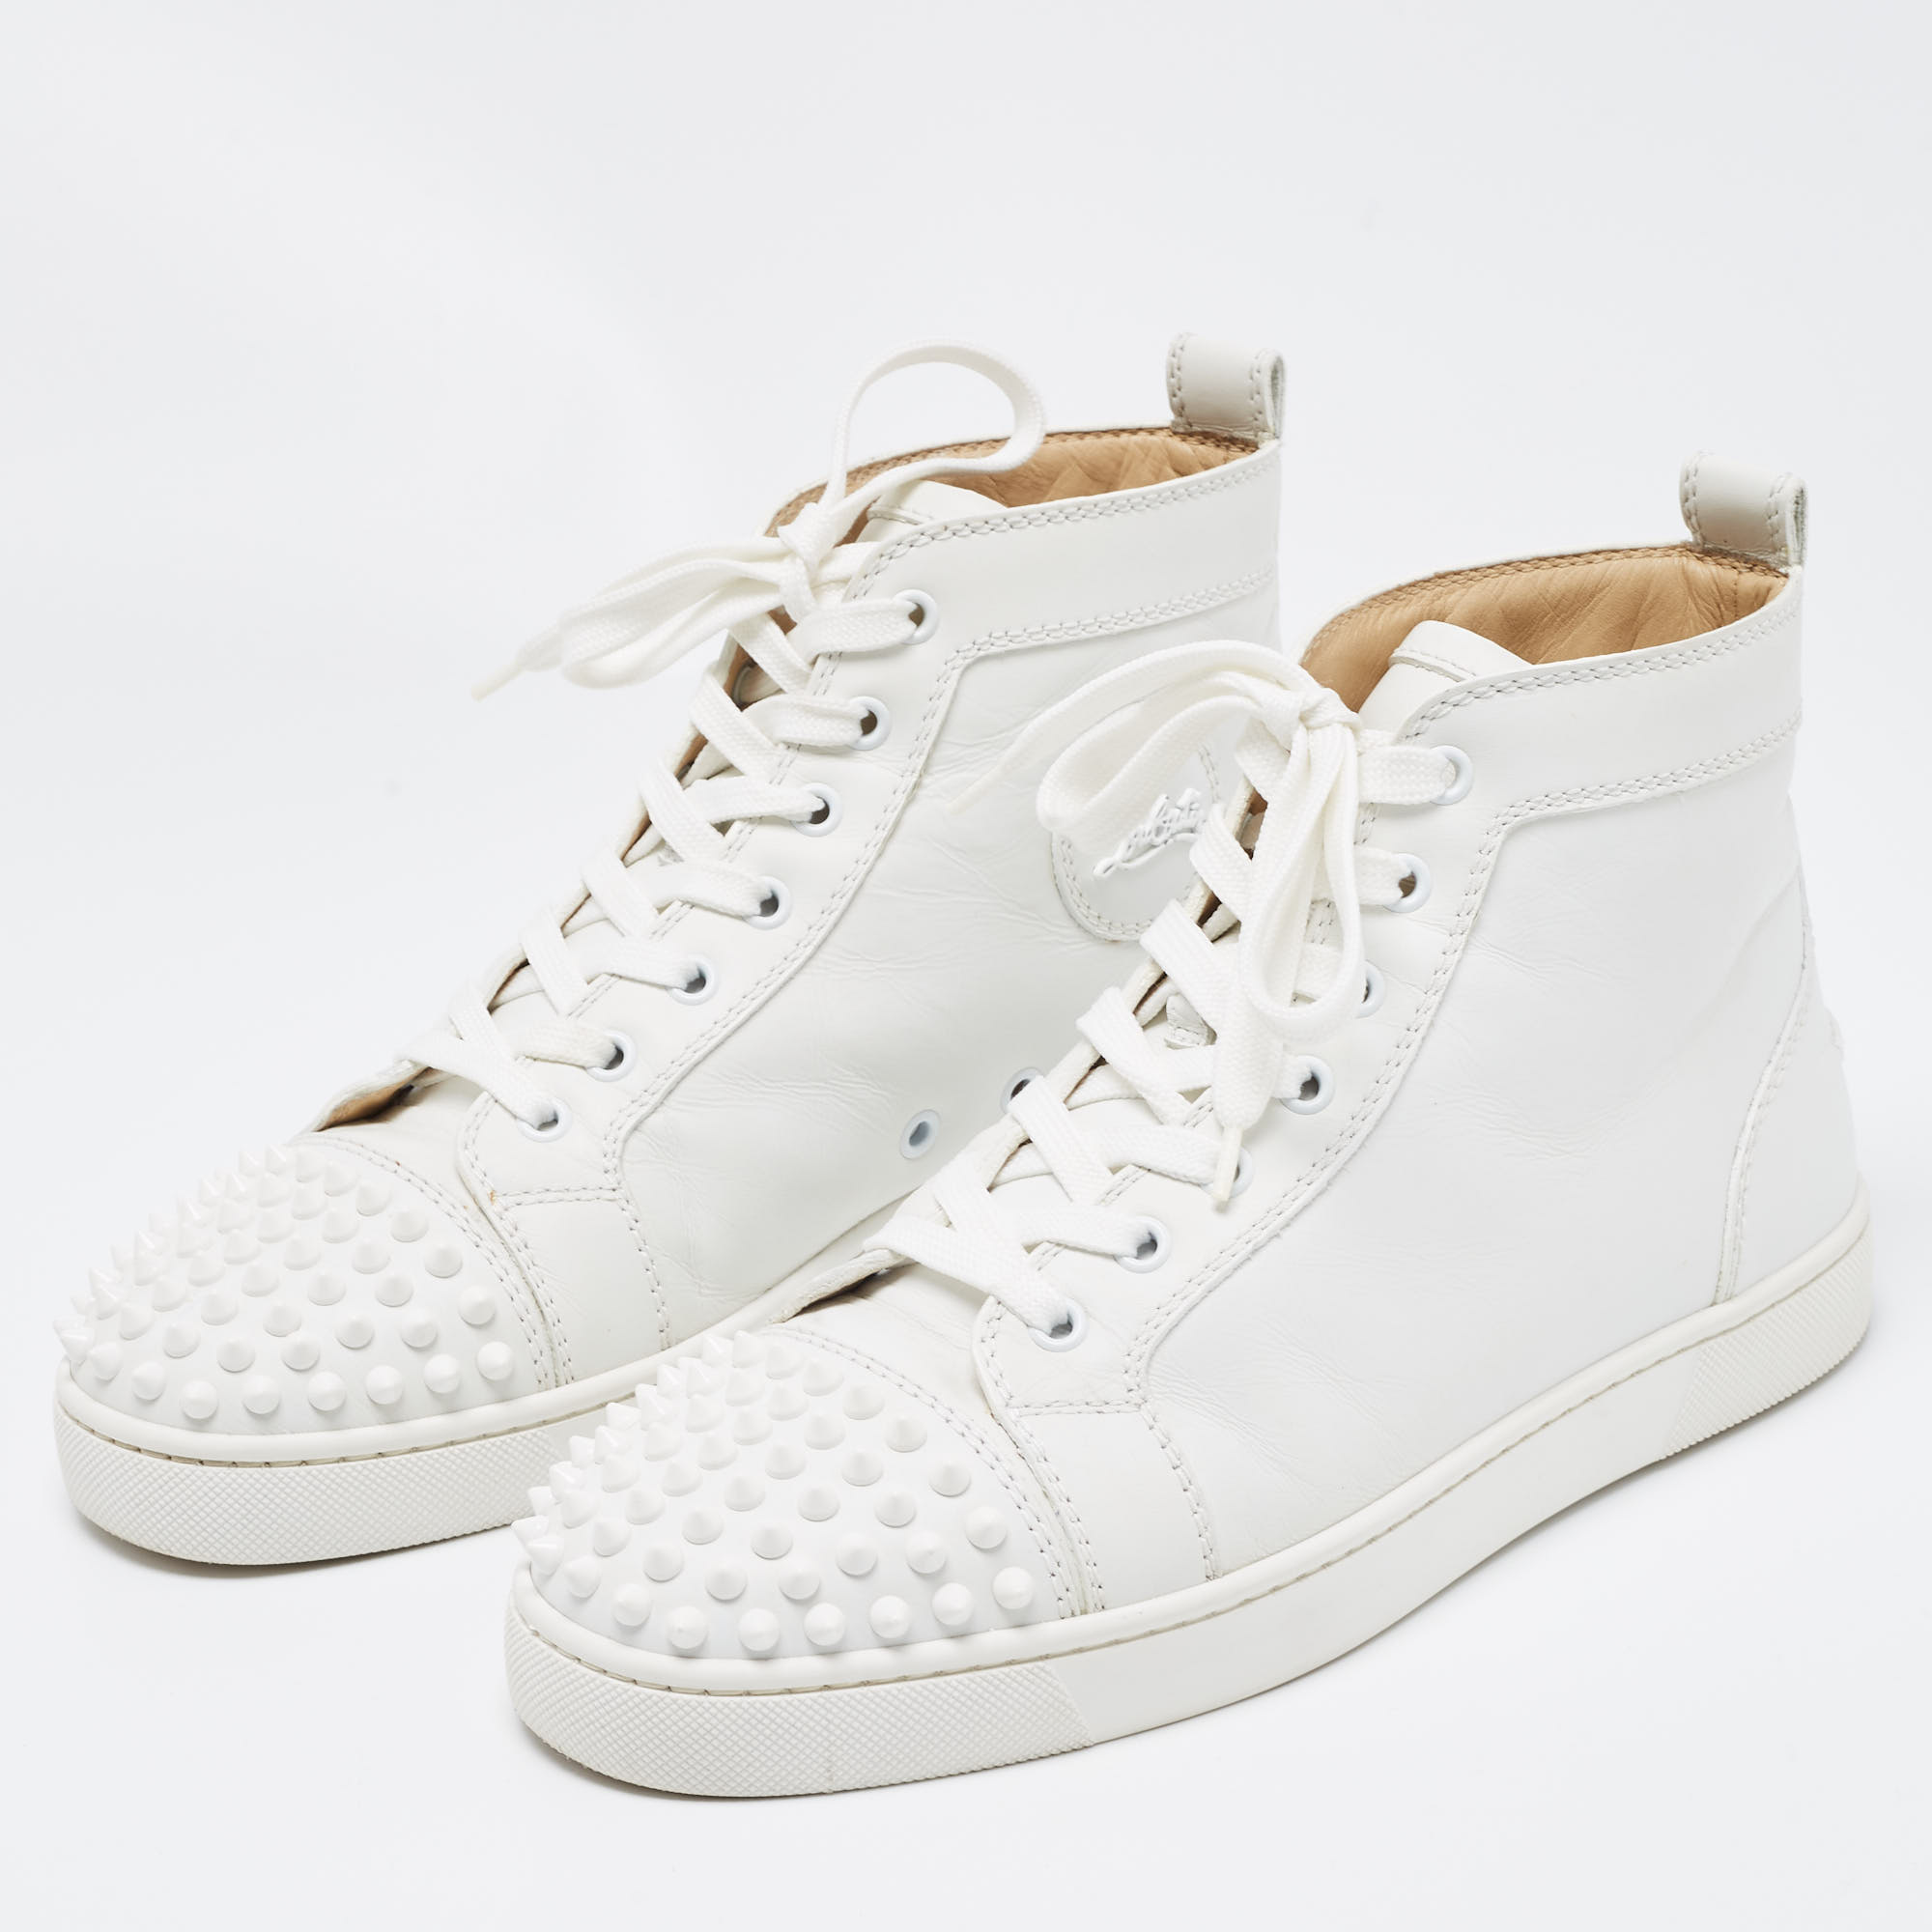 

Christian Louboutin White Leather Louis Spiked Cap Toe High Top Sneakers Size